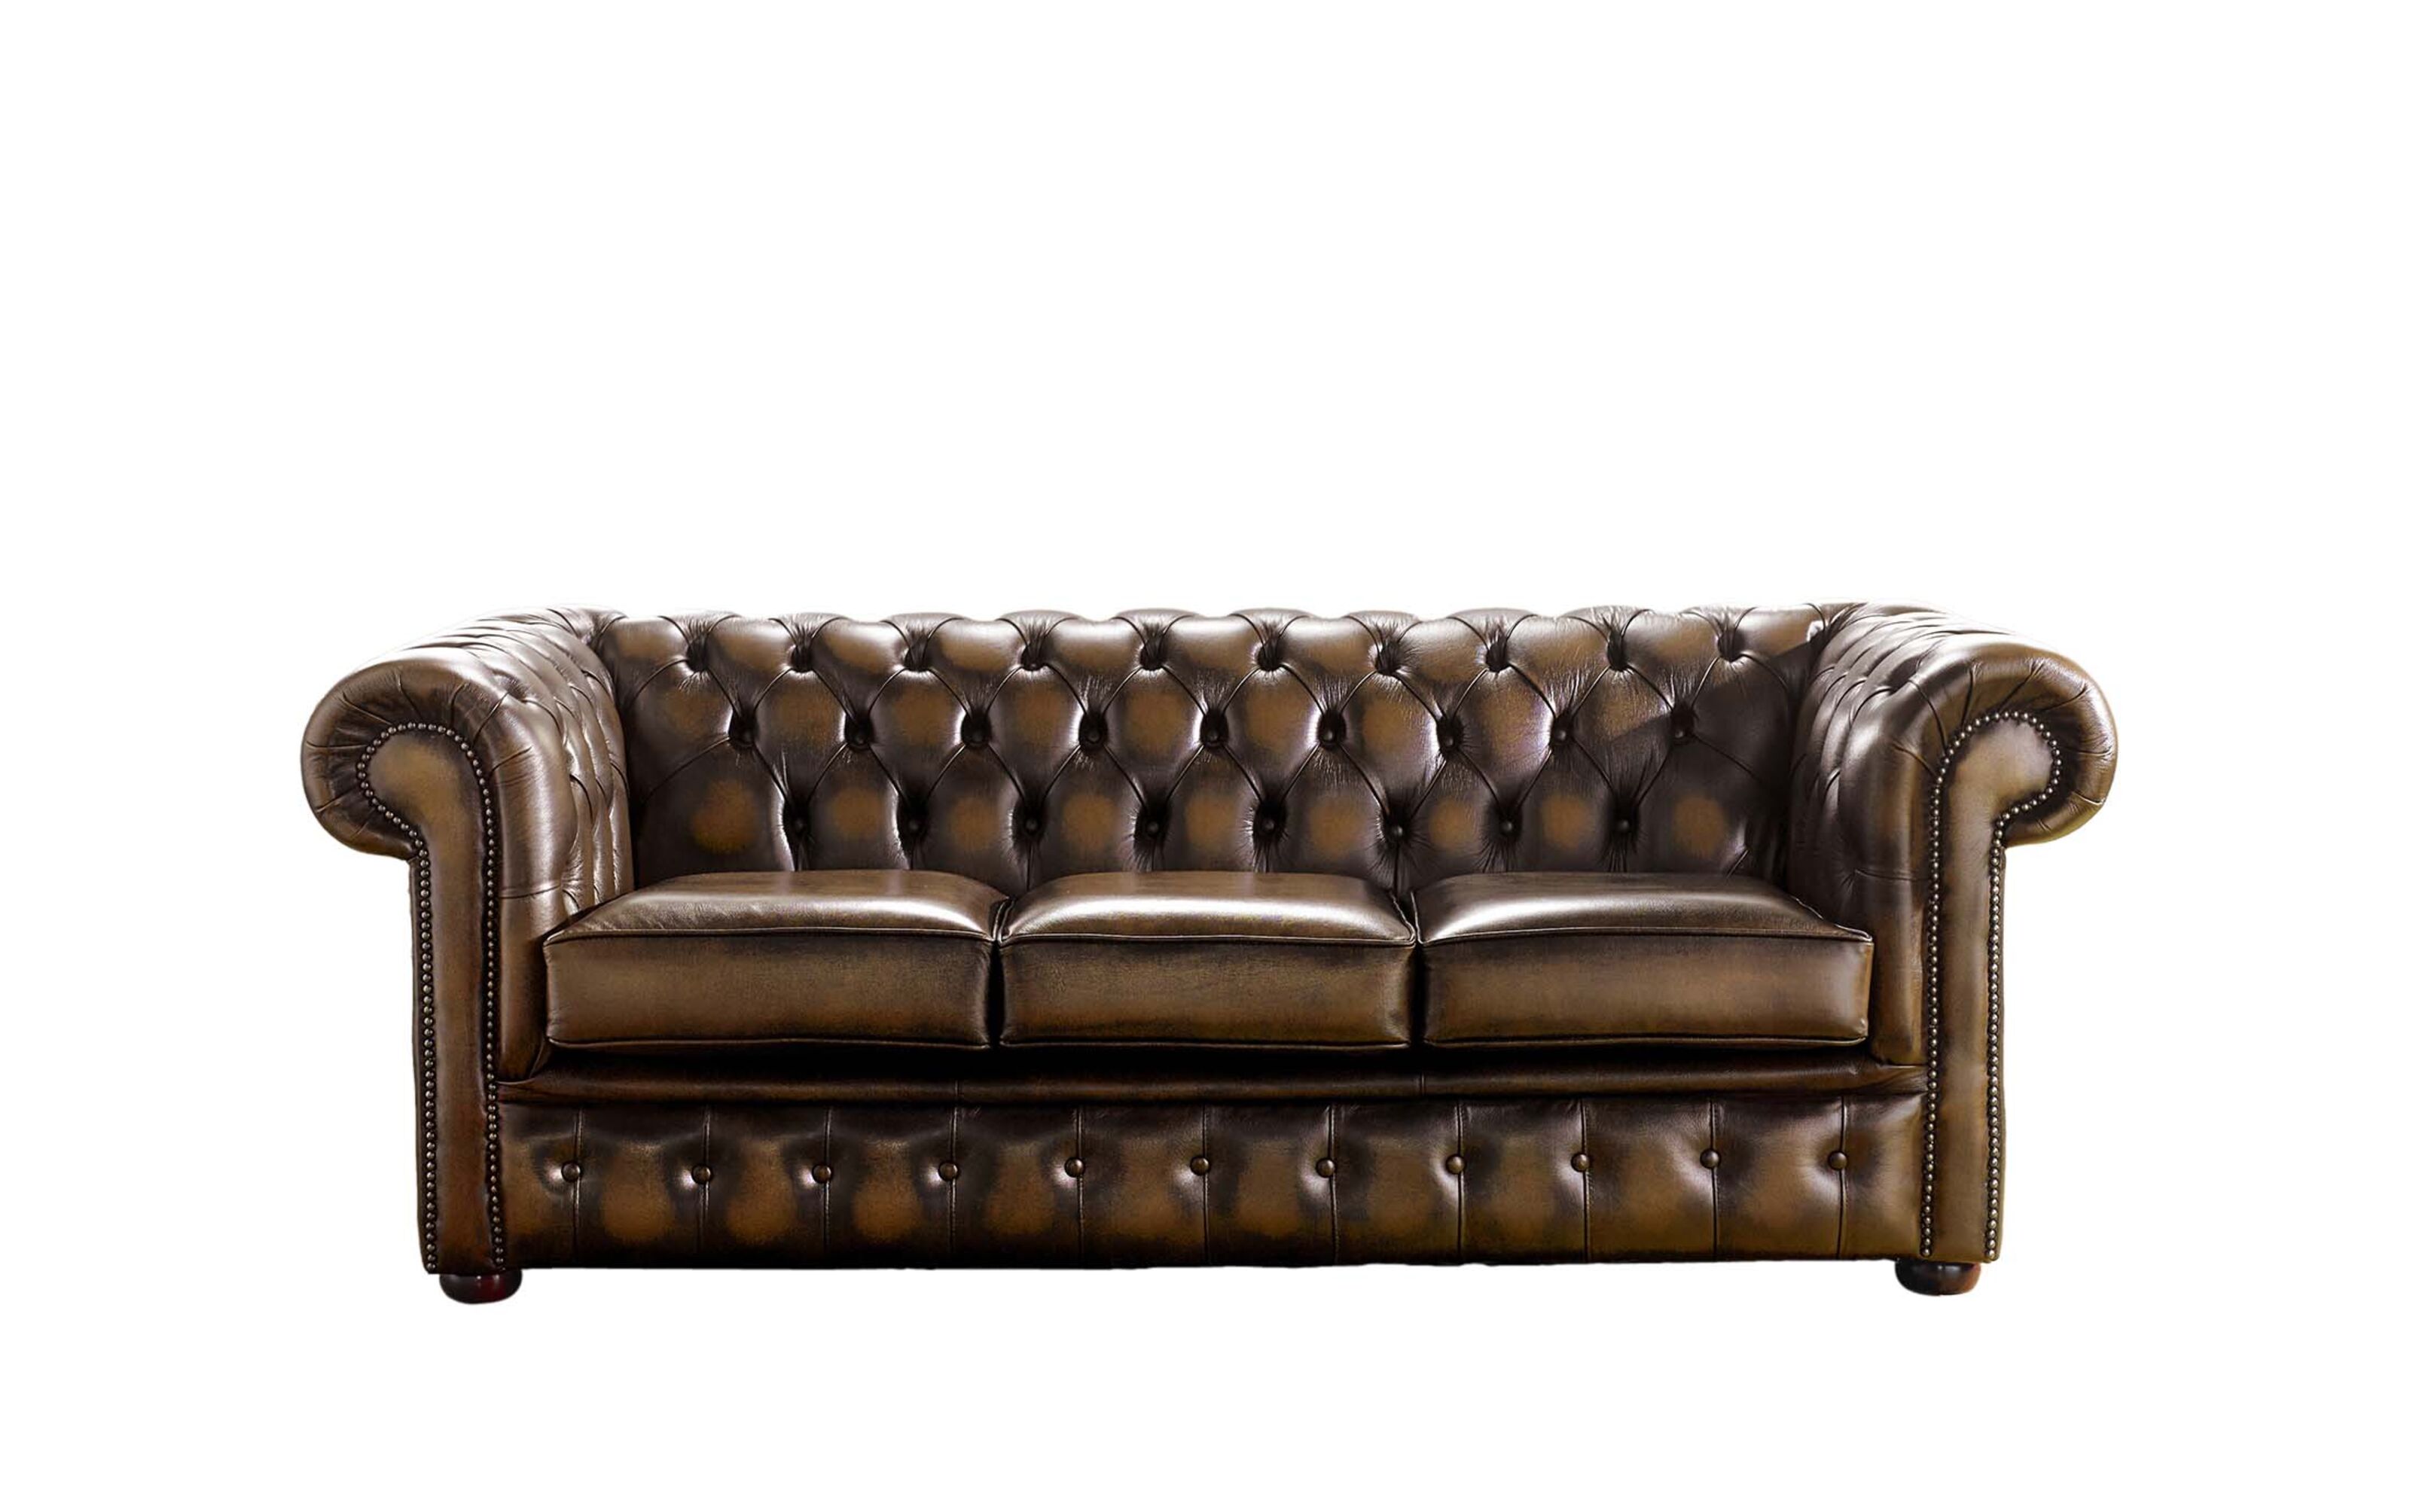 Unmasking Authenticity Recognizing the True Essence of a Chesterfield Sofa  %Post Title